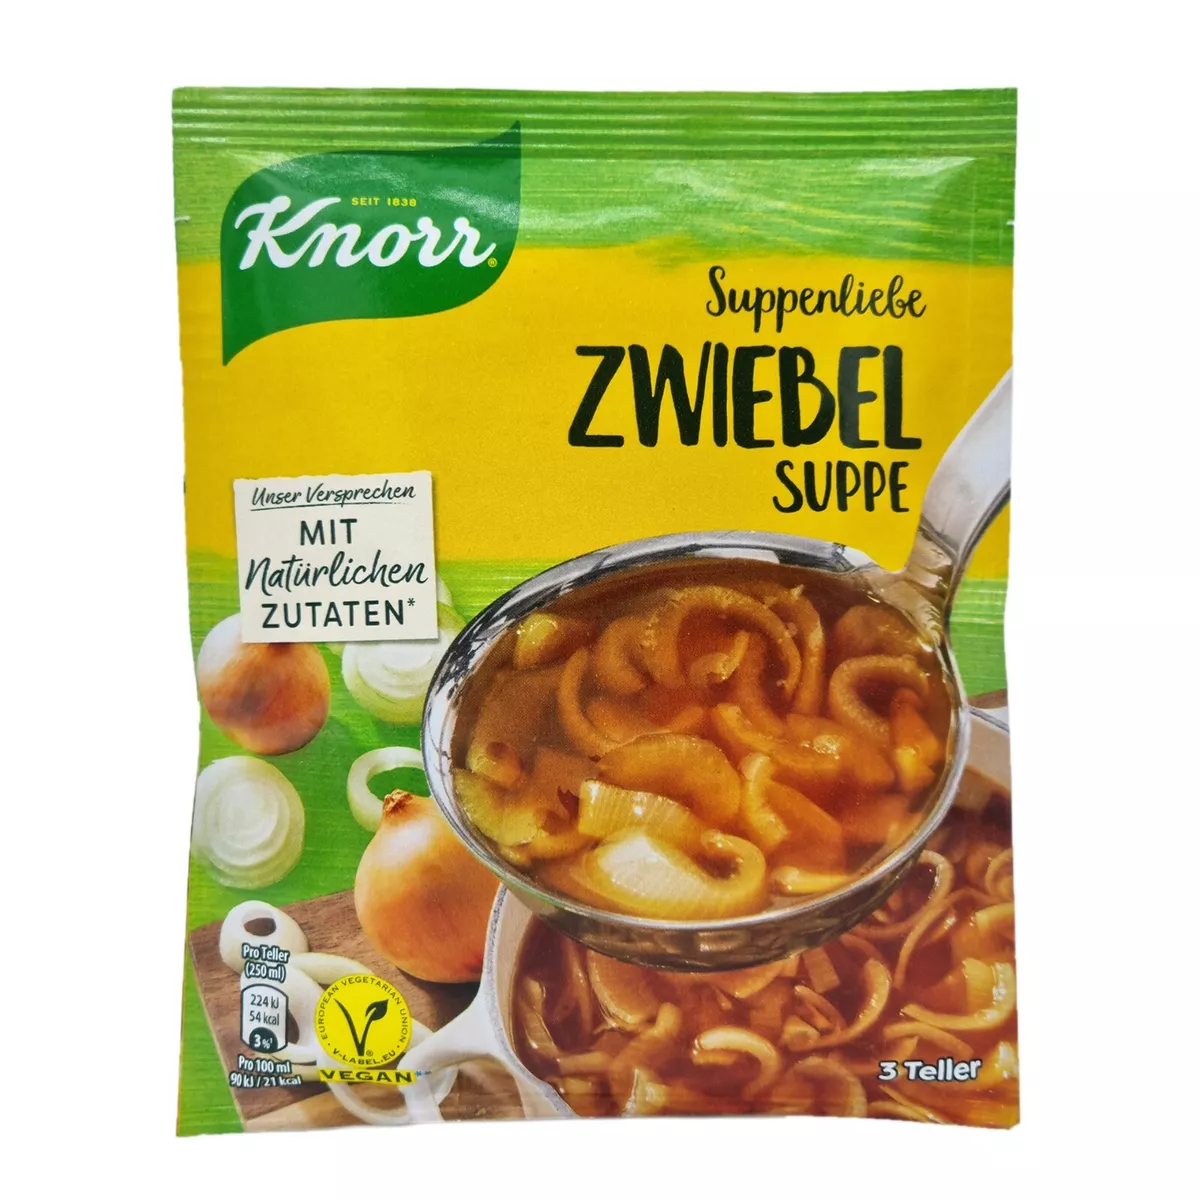 8x Knorr Suppenliebe 🍲 Zwiebel Suppe onion soup ✈TRACKED SHIPPING | eBay